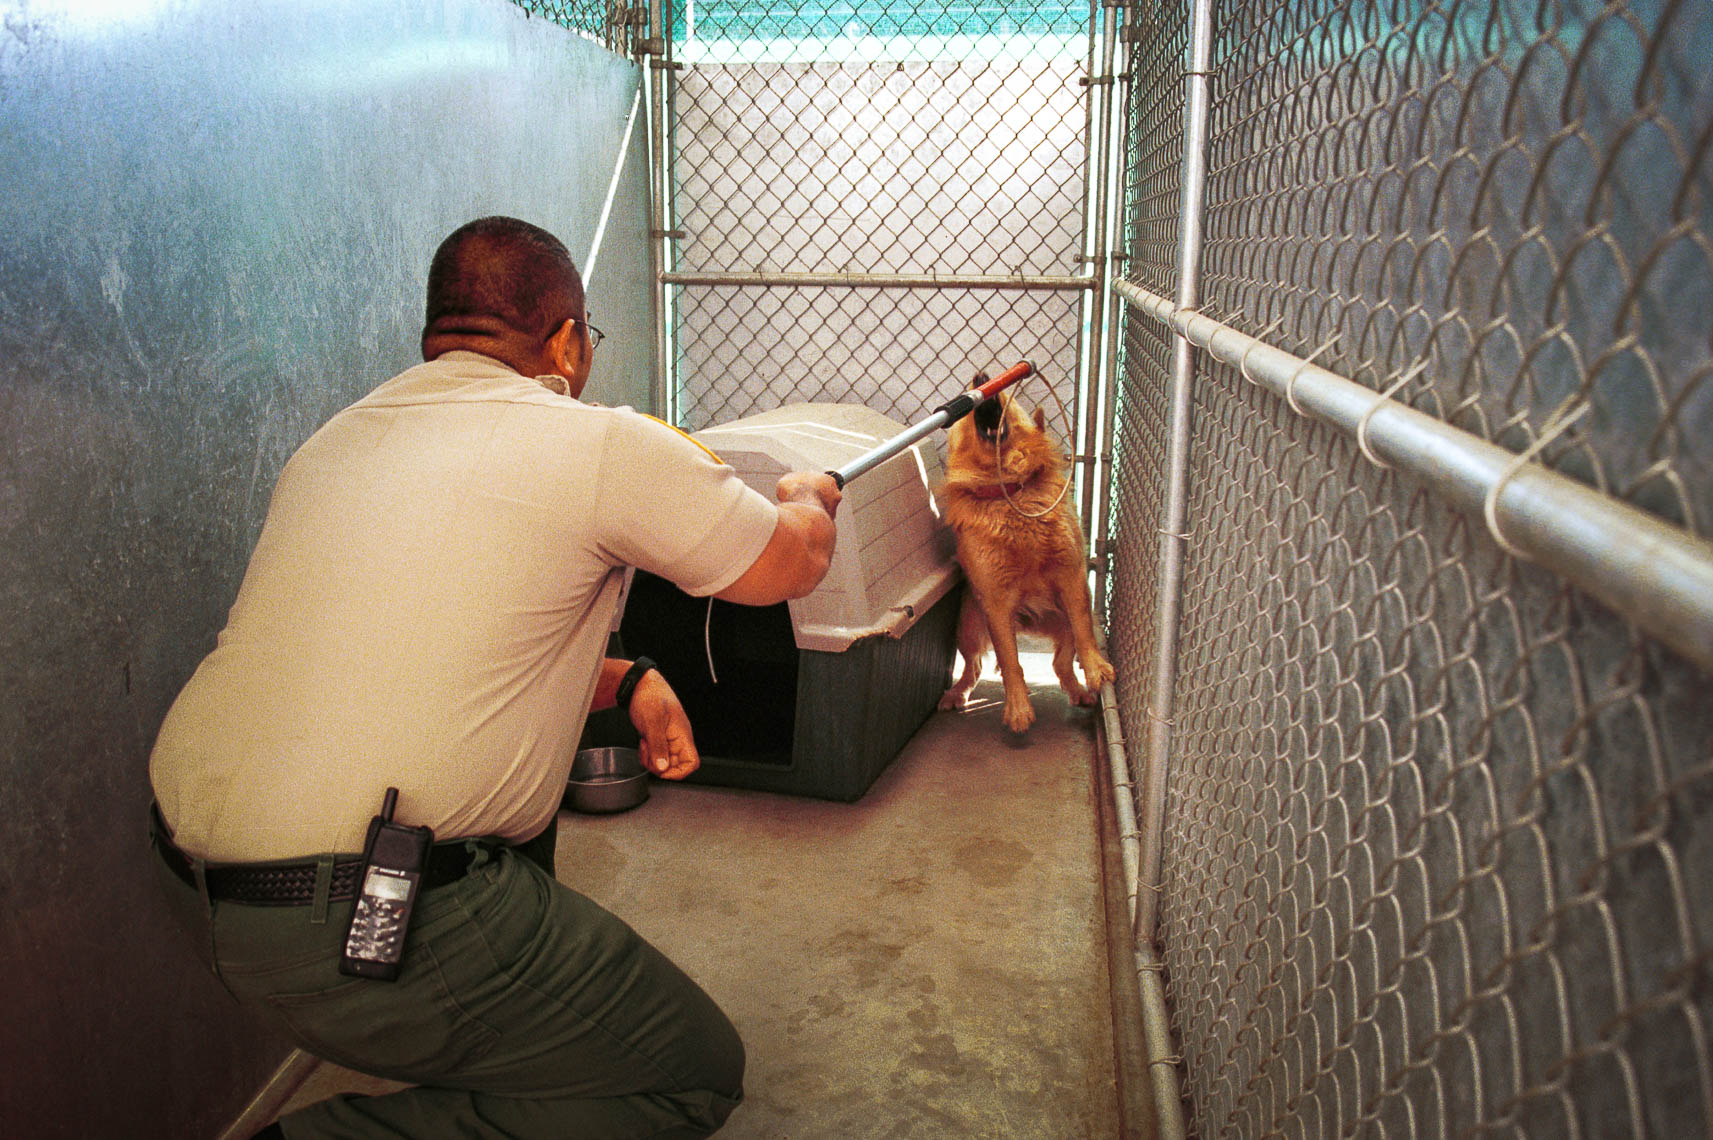 stray chow chow dog is caught by officer and to be euthanized - santa barbara california